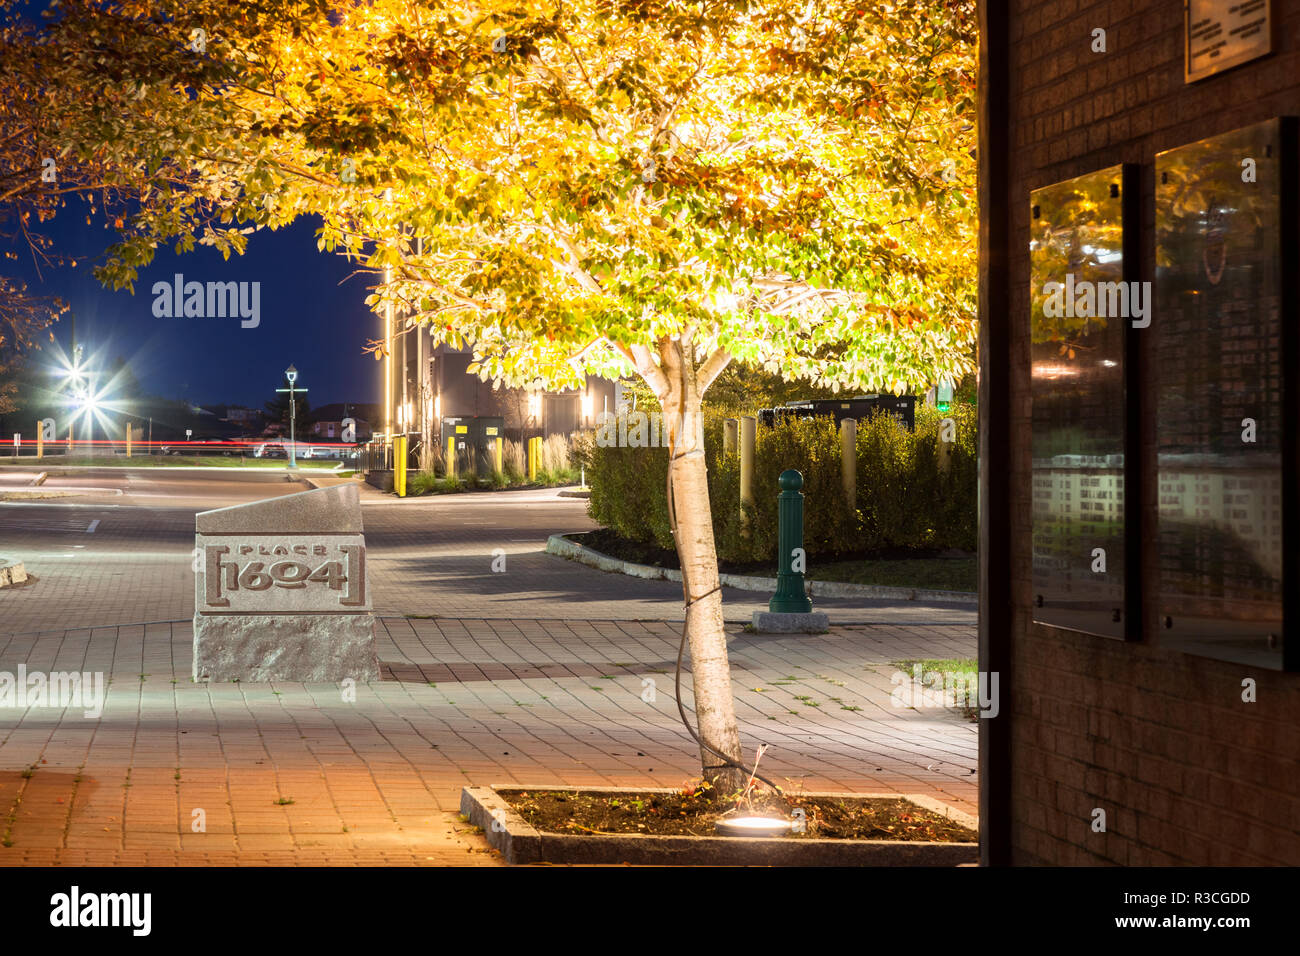 Place 1604 during autumn at dusk in downtown Dieppe, Westmorland County, New Brunswick, Canada. Stock Photo